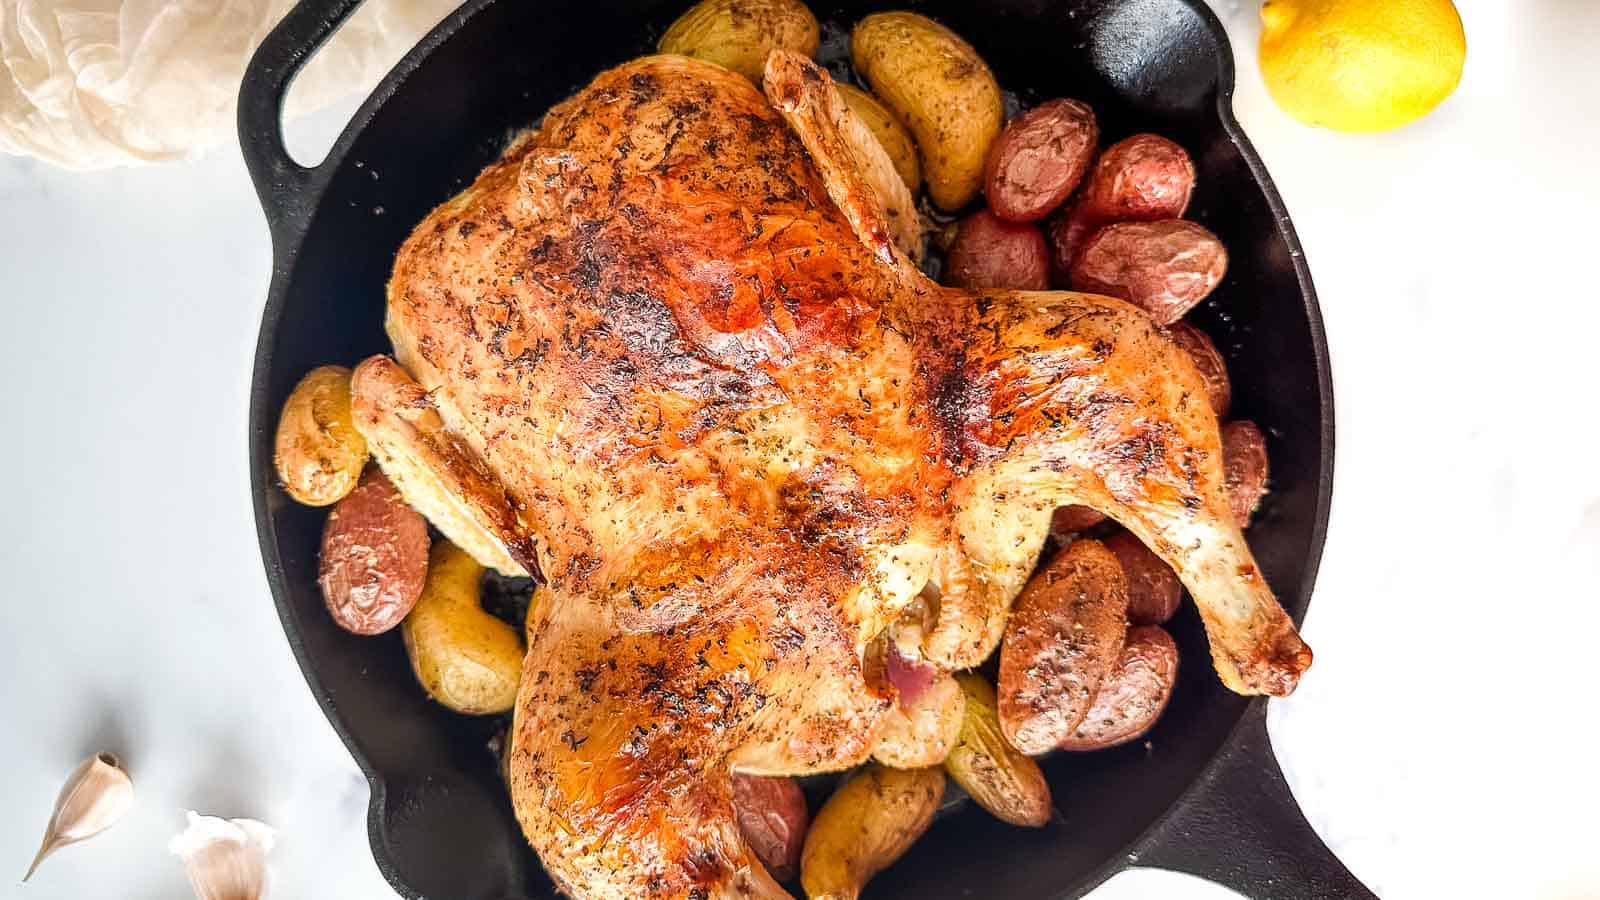 Roasted chicken and potatoes in a cast iron skillet.